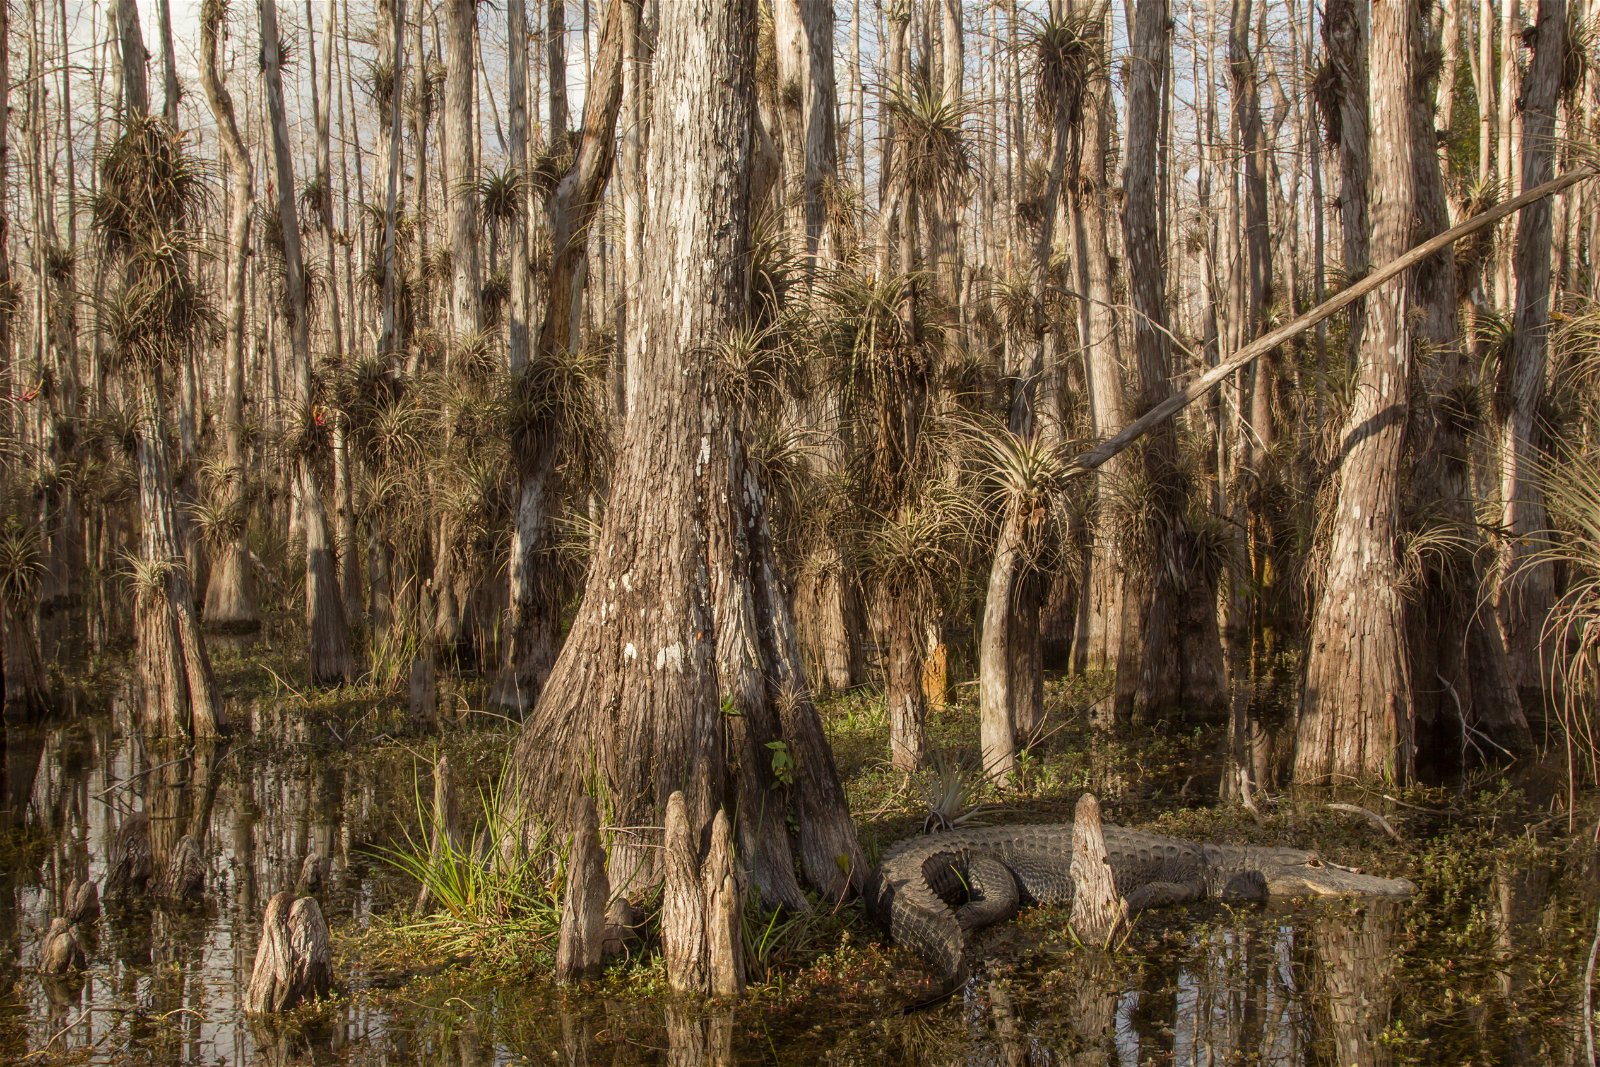 Cypress Swamps Sub-biome